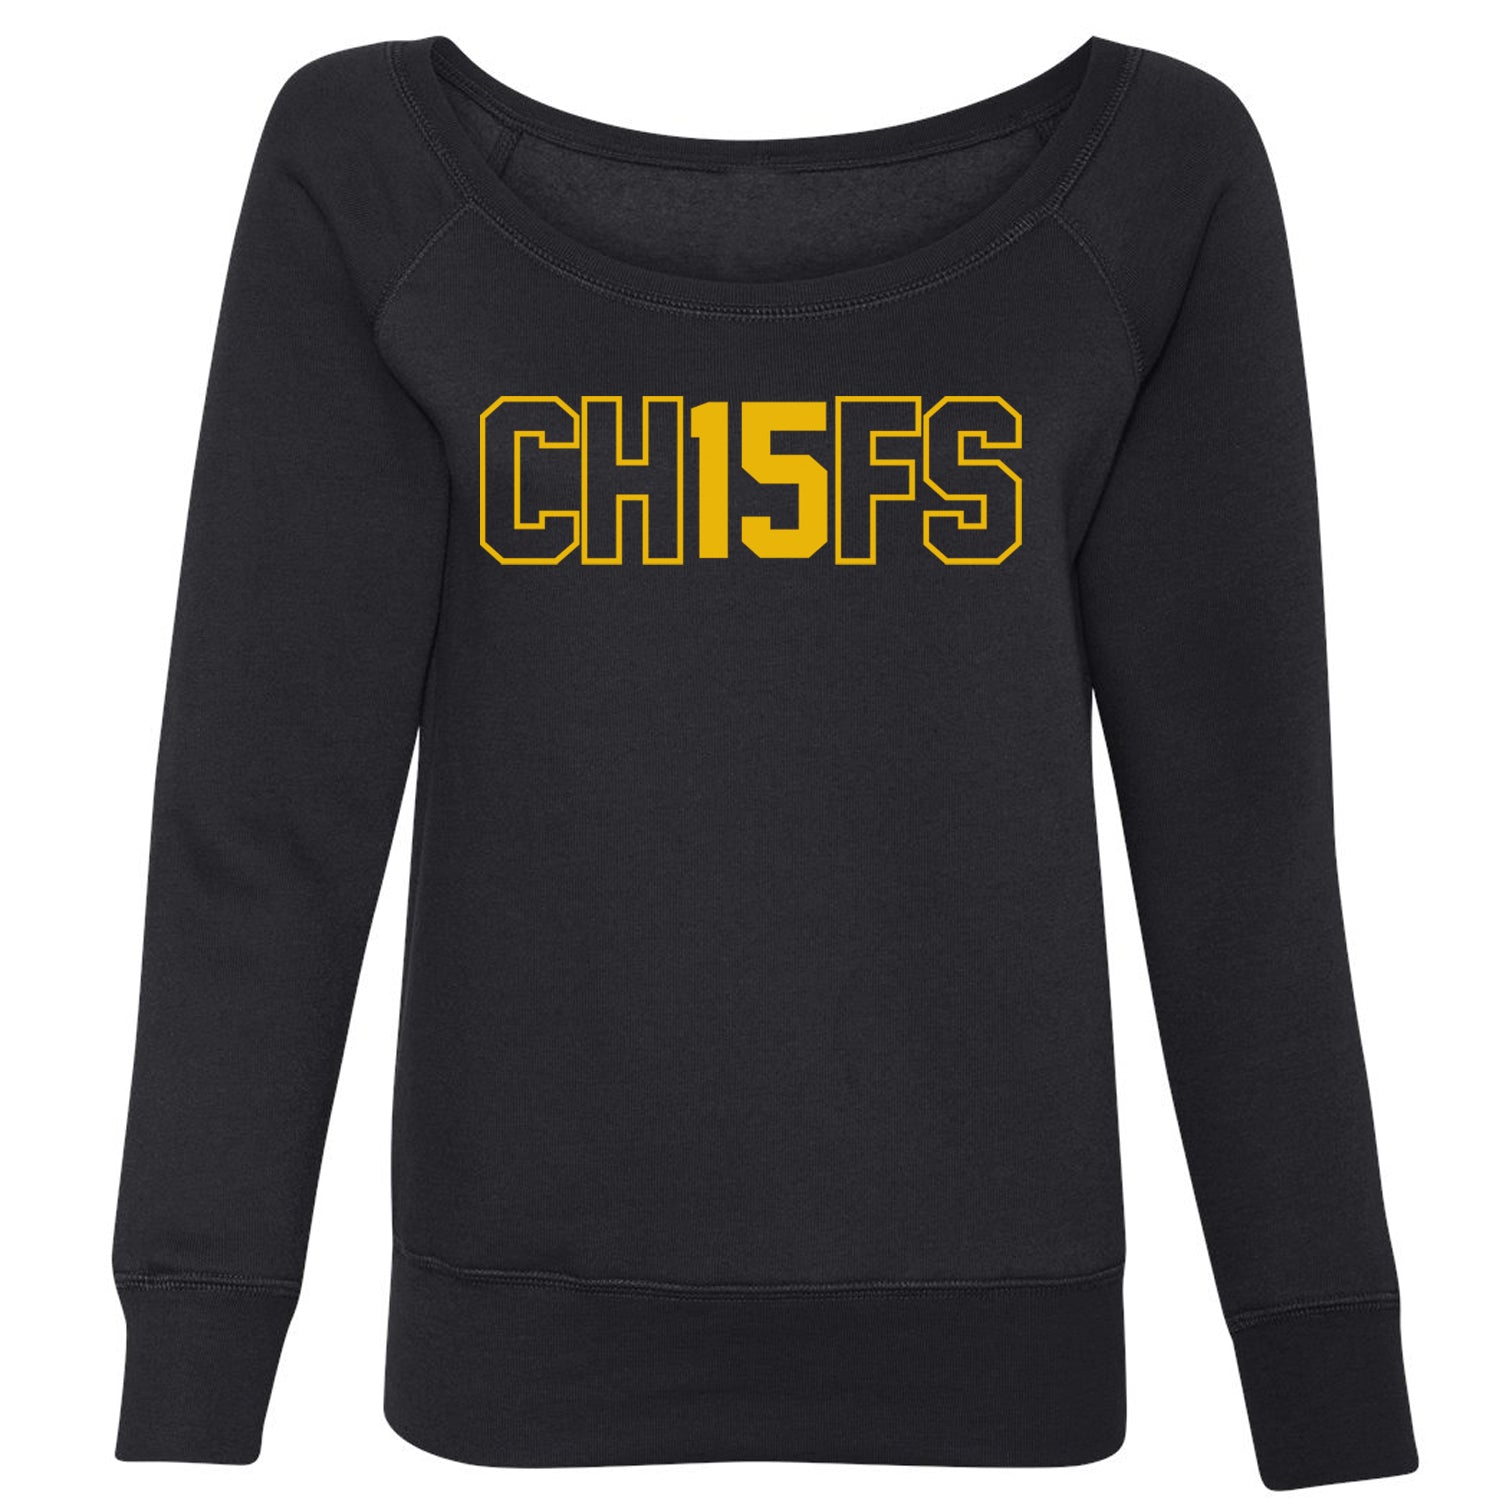 Ch15fs Chief 15 Shirt Slouchy Off Shoulder Oversized Sweatshirt ass, big, burrowhead, game, kelce, know, moutha, my, nd, patrick, role, shut, sports, your by Expression Tees